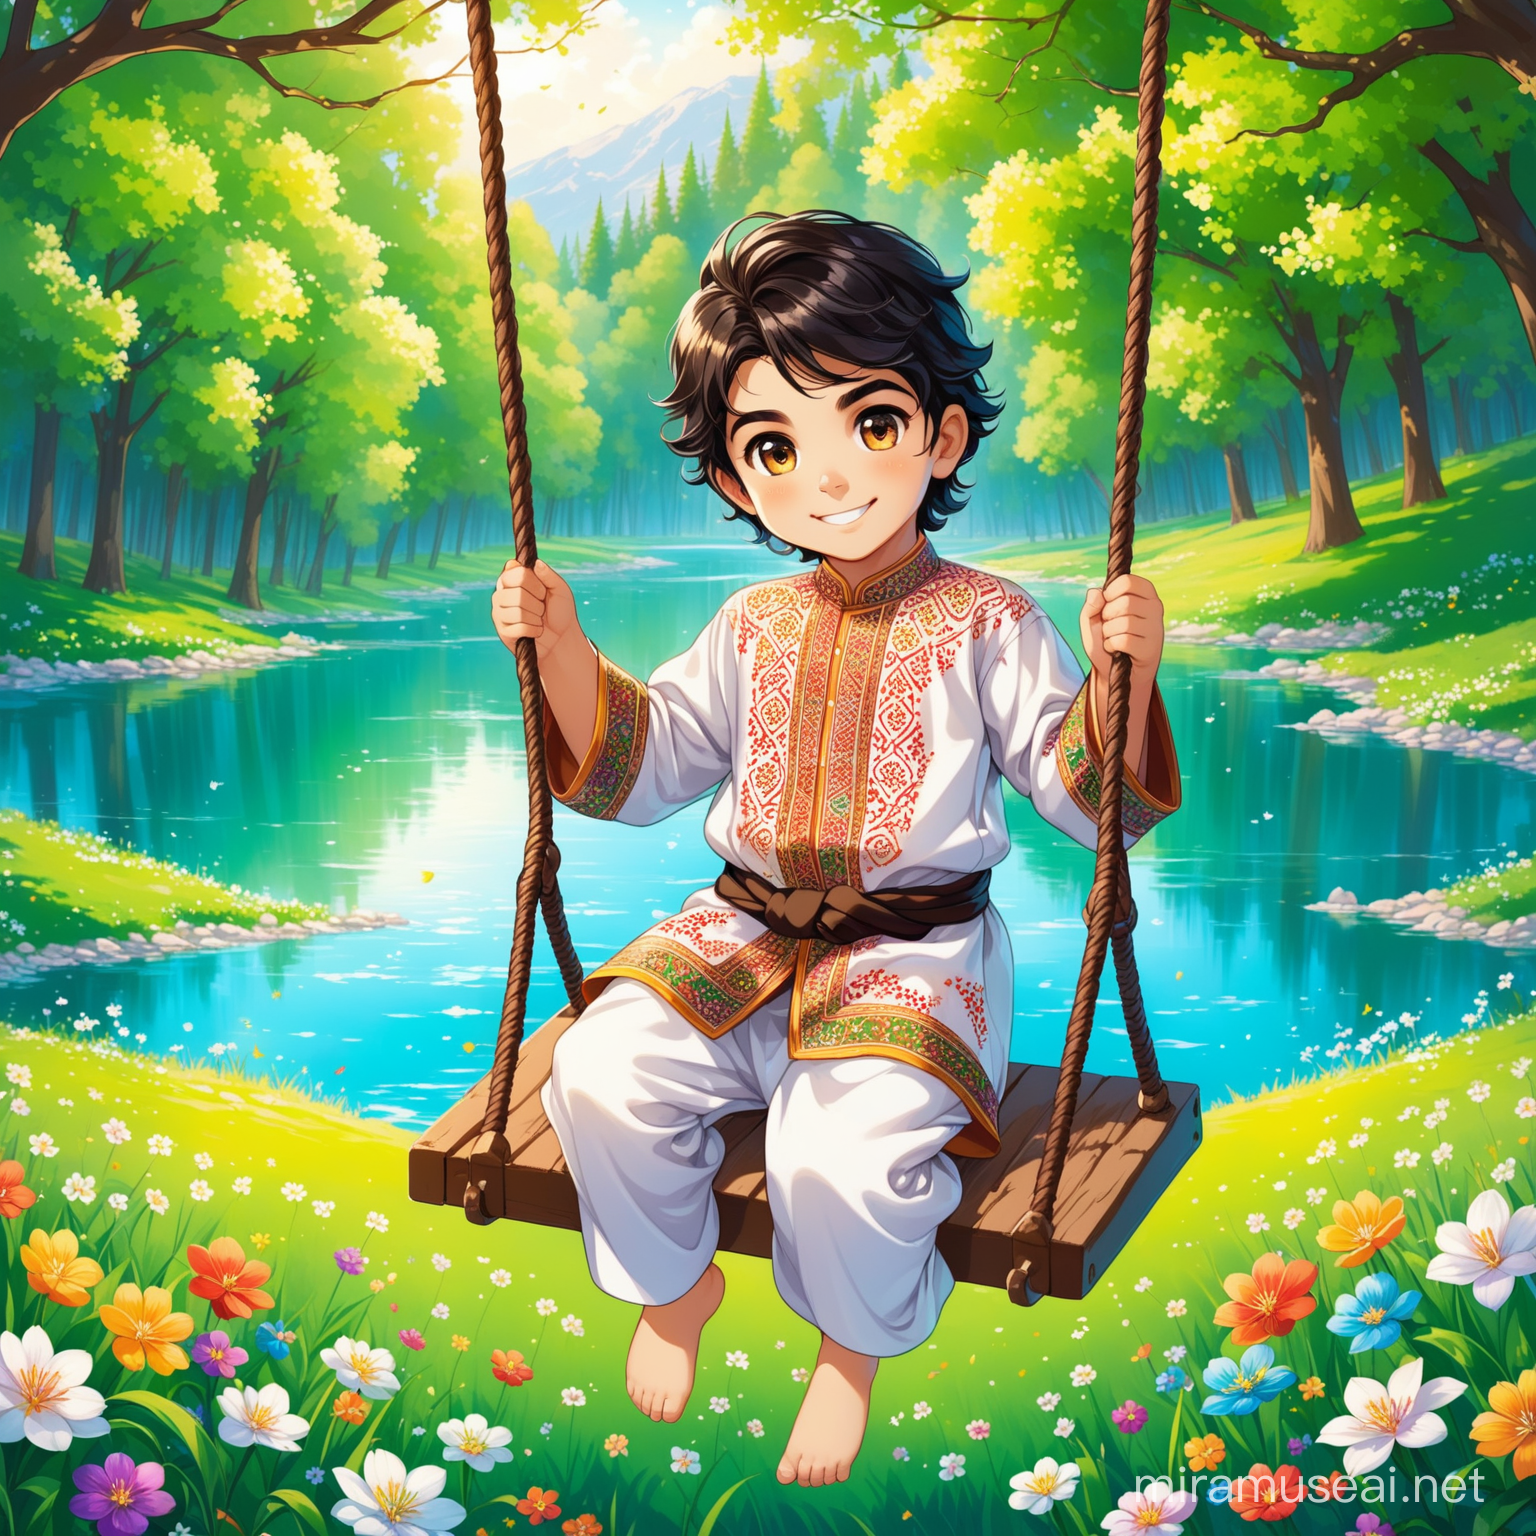 Ali is Persian little boy, 7 years old, cute, white skin, smiling, clothes with a lot of Persian designs.

Ali is swinging.

Atmosphere forest, grass, flowers, spring, lake.